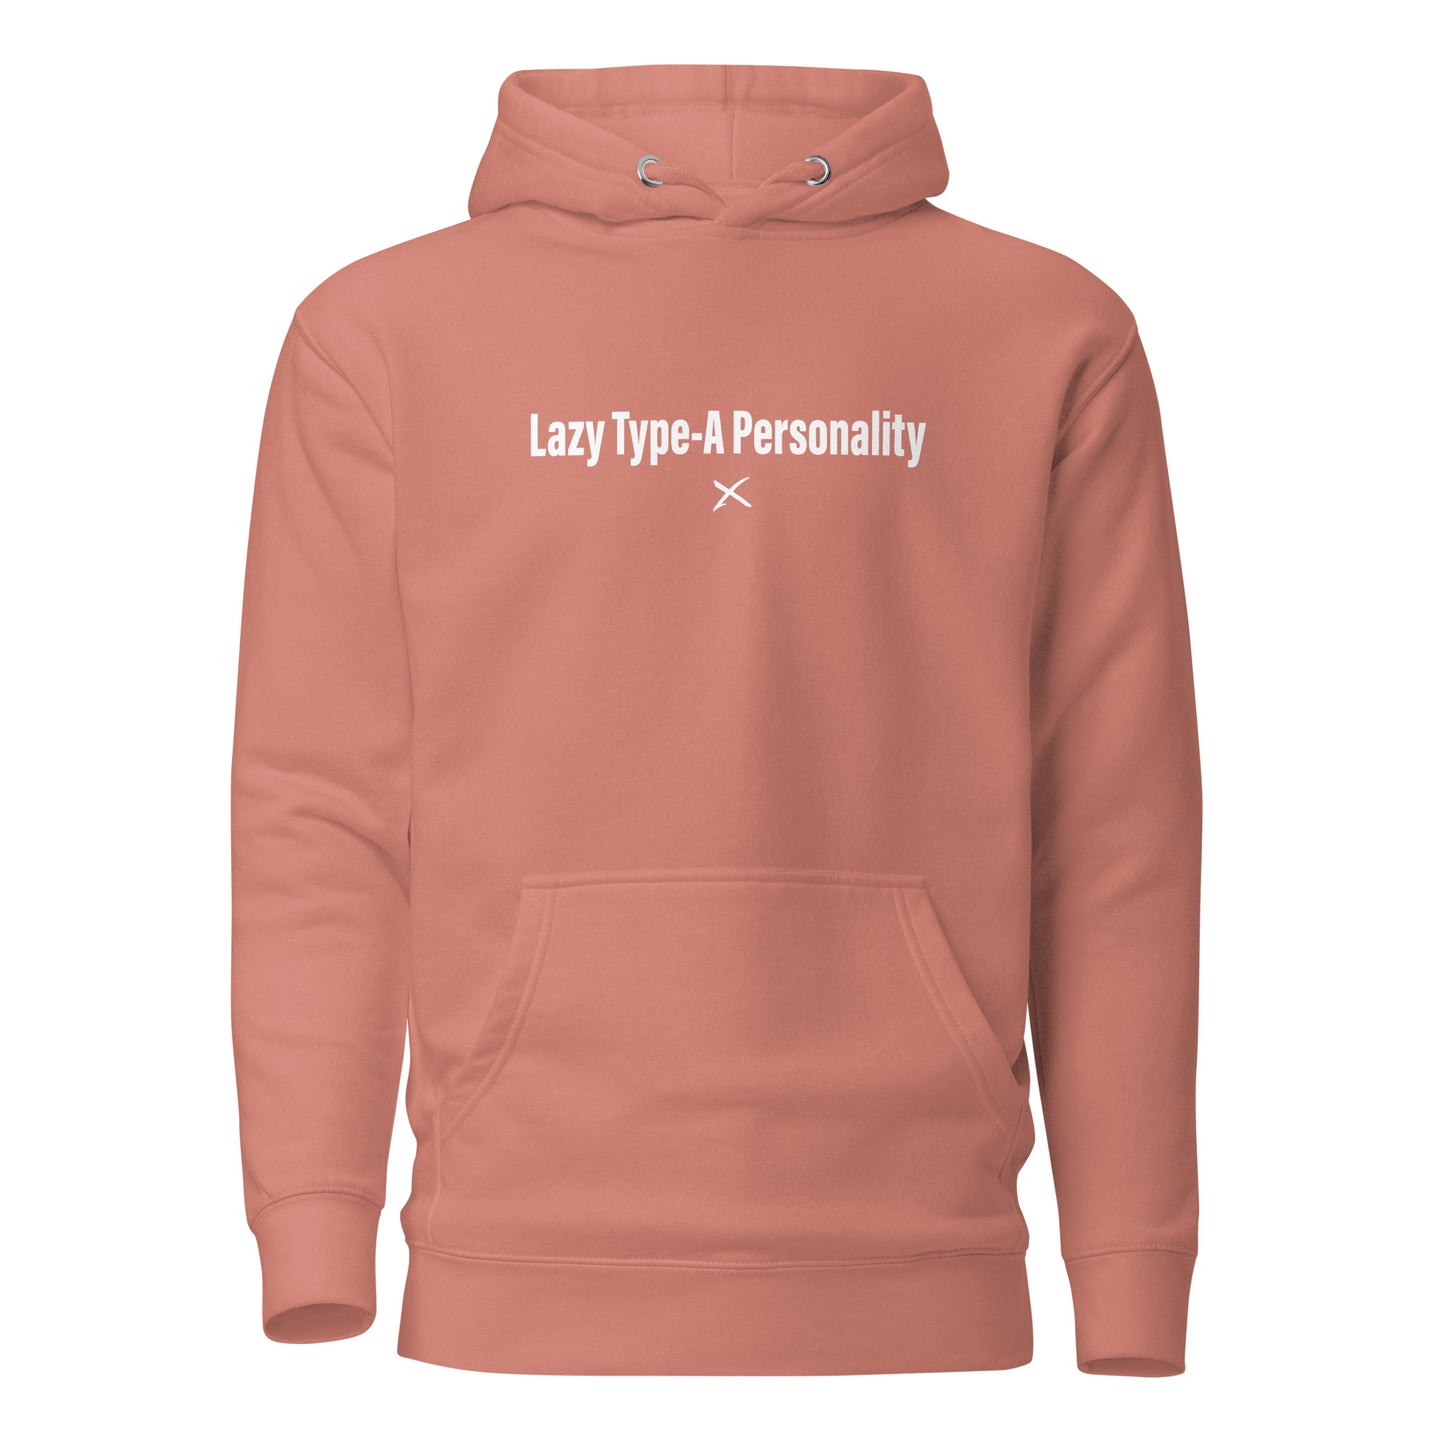 Lazy Type-A Personality - Hoodie